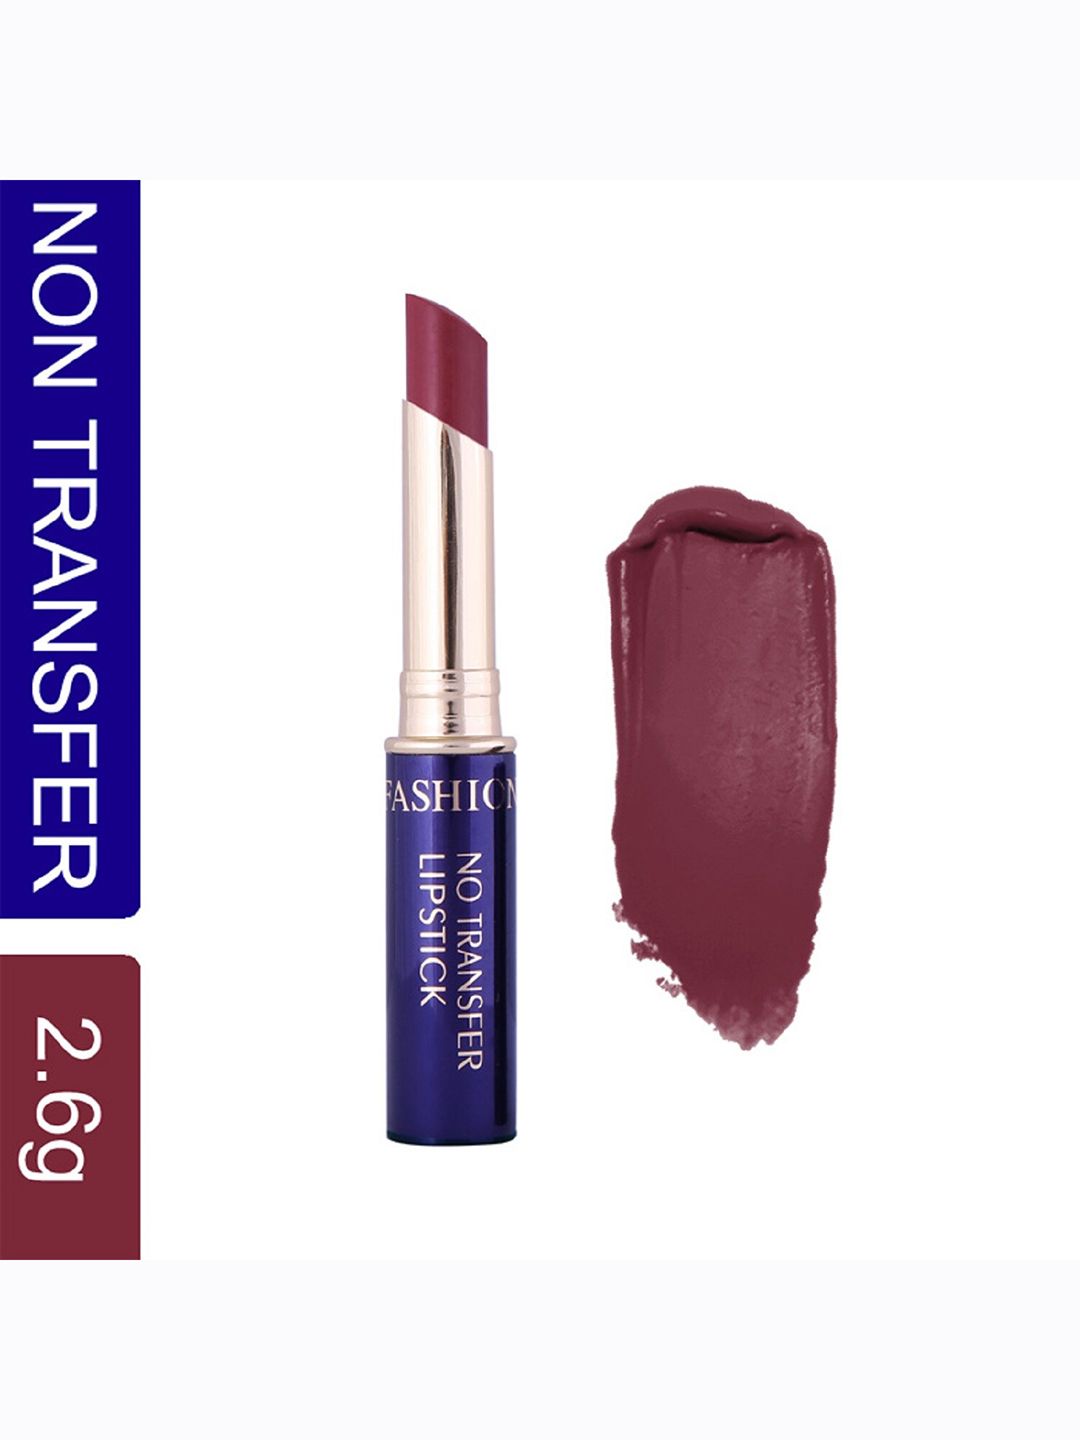 Fashion Colour No Transfer Matte Waterproof Lipstick 2.6 g - Pink Violet 68 Price in India